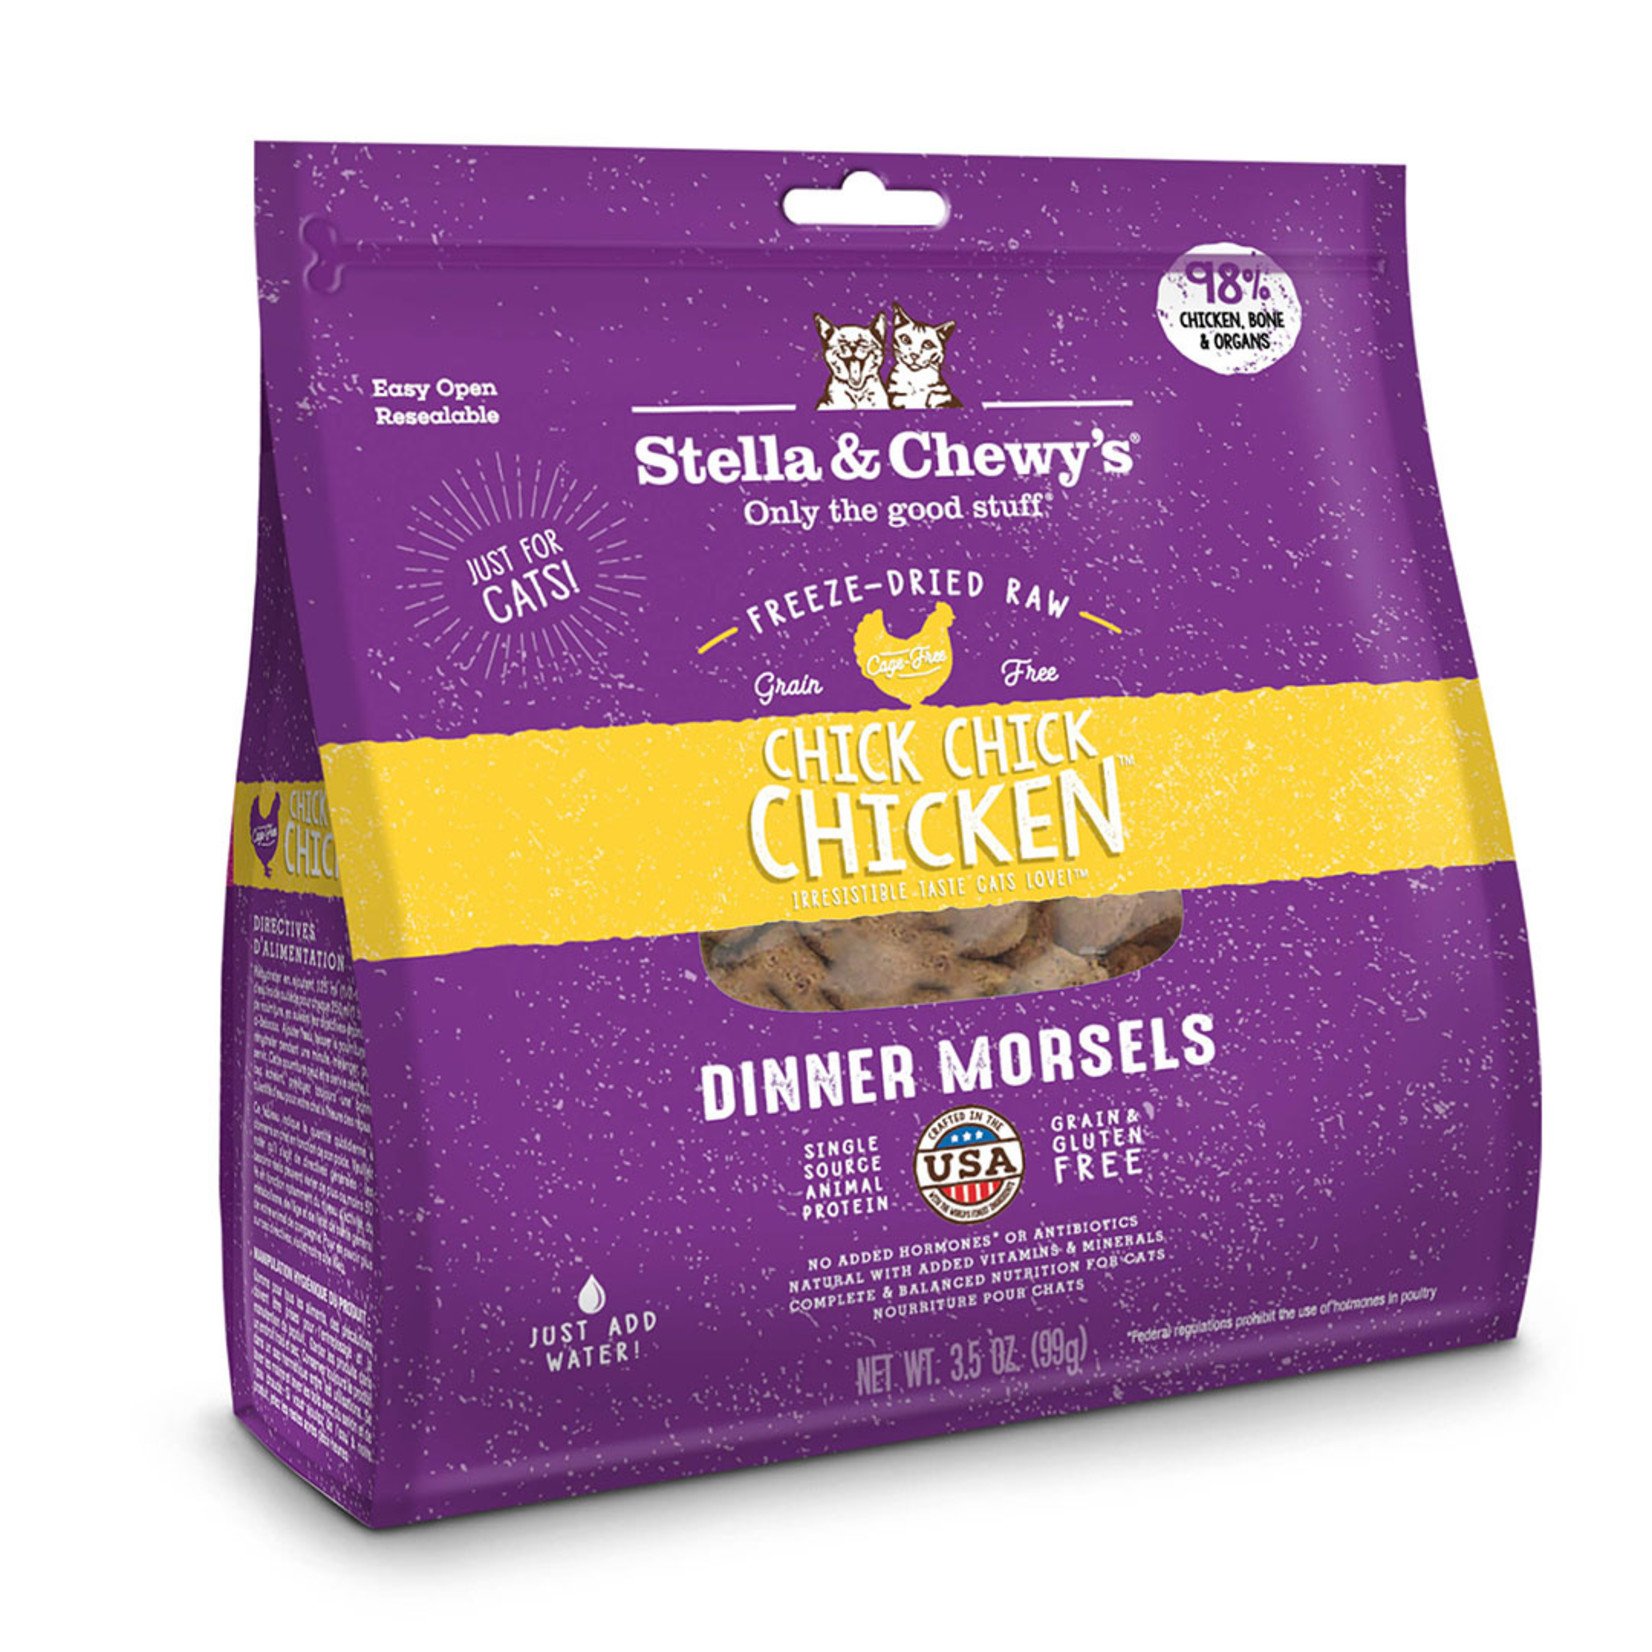 Stella and Chewys Stella & Chewy's Freeze Dried Raw Cat Food Dinner Morsels Chick Chick Chicken Grain Free